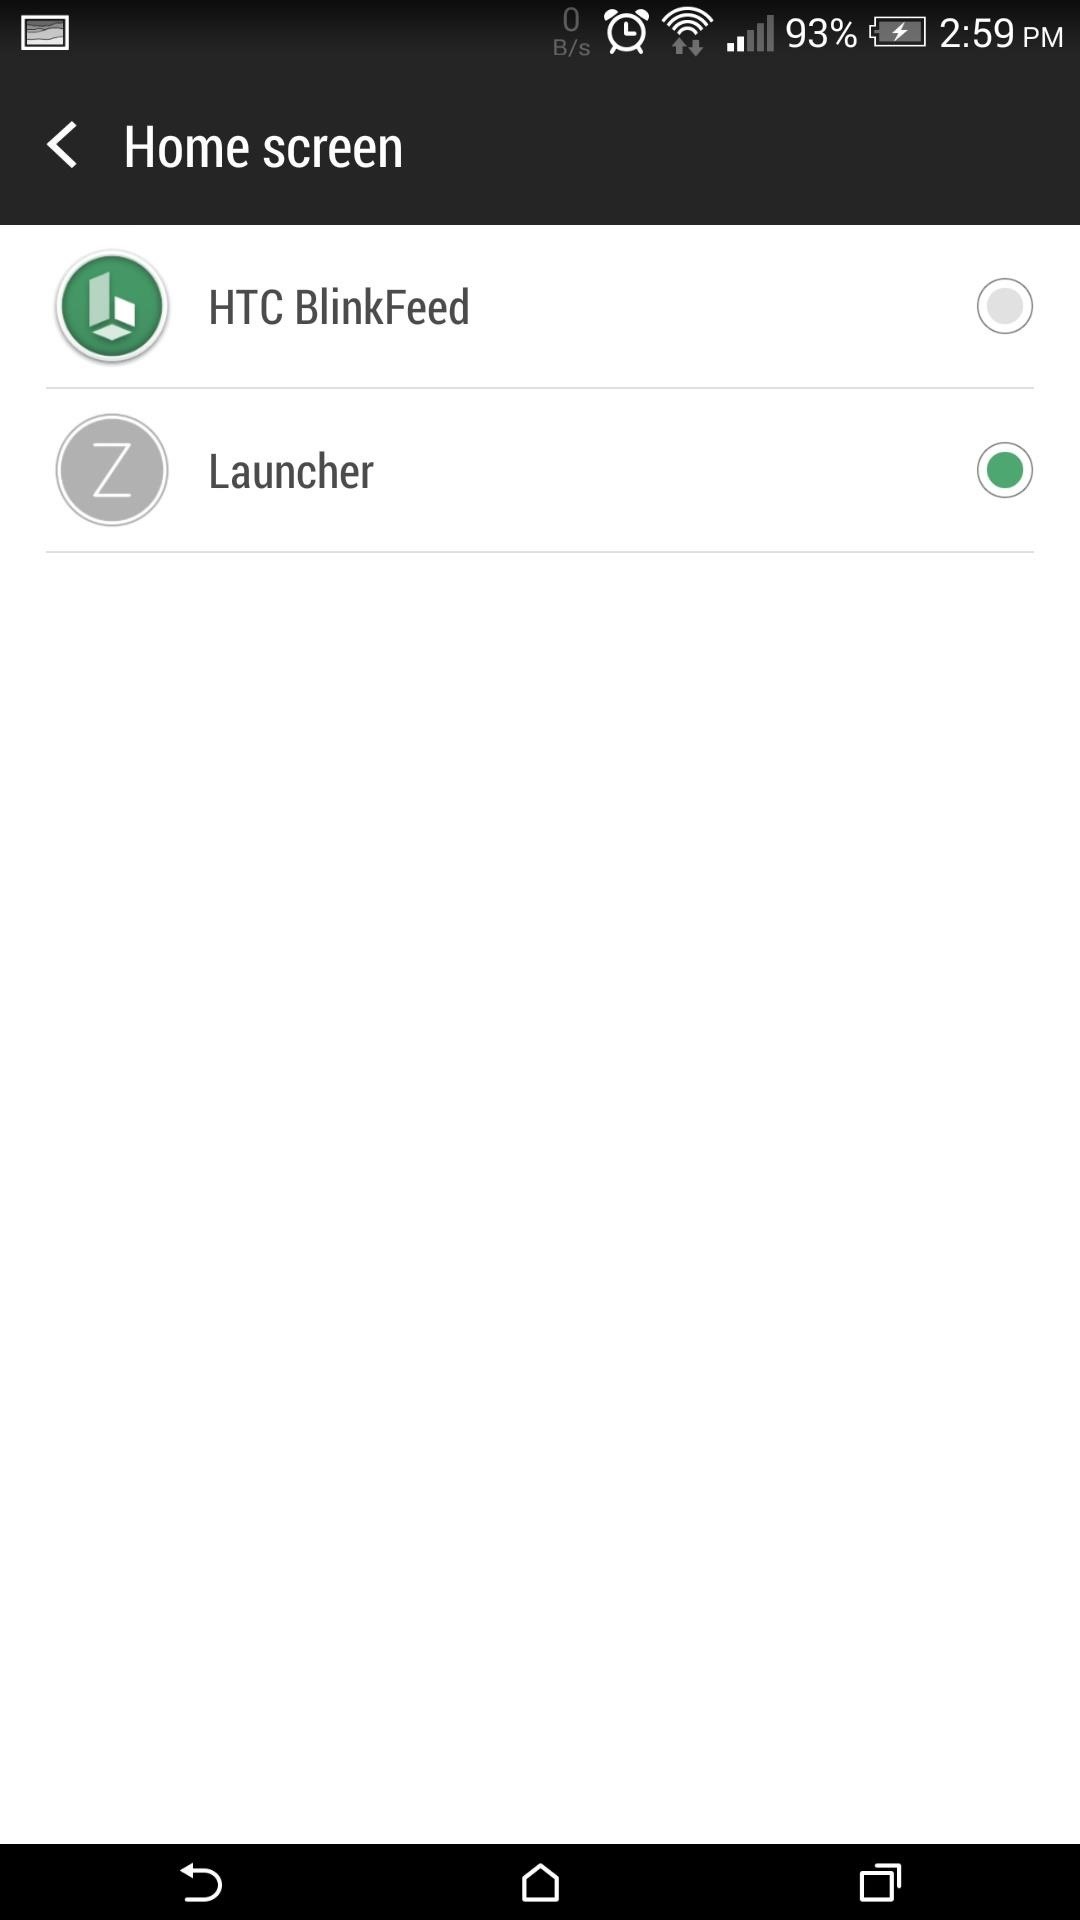 How to Install & Use the New Nokia Z Launcher (Even if You're Rooted)